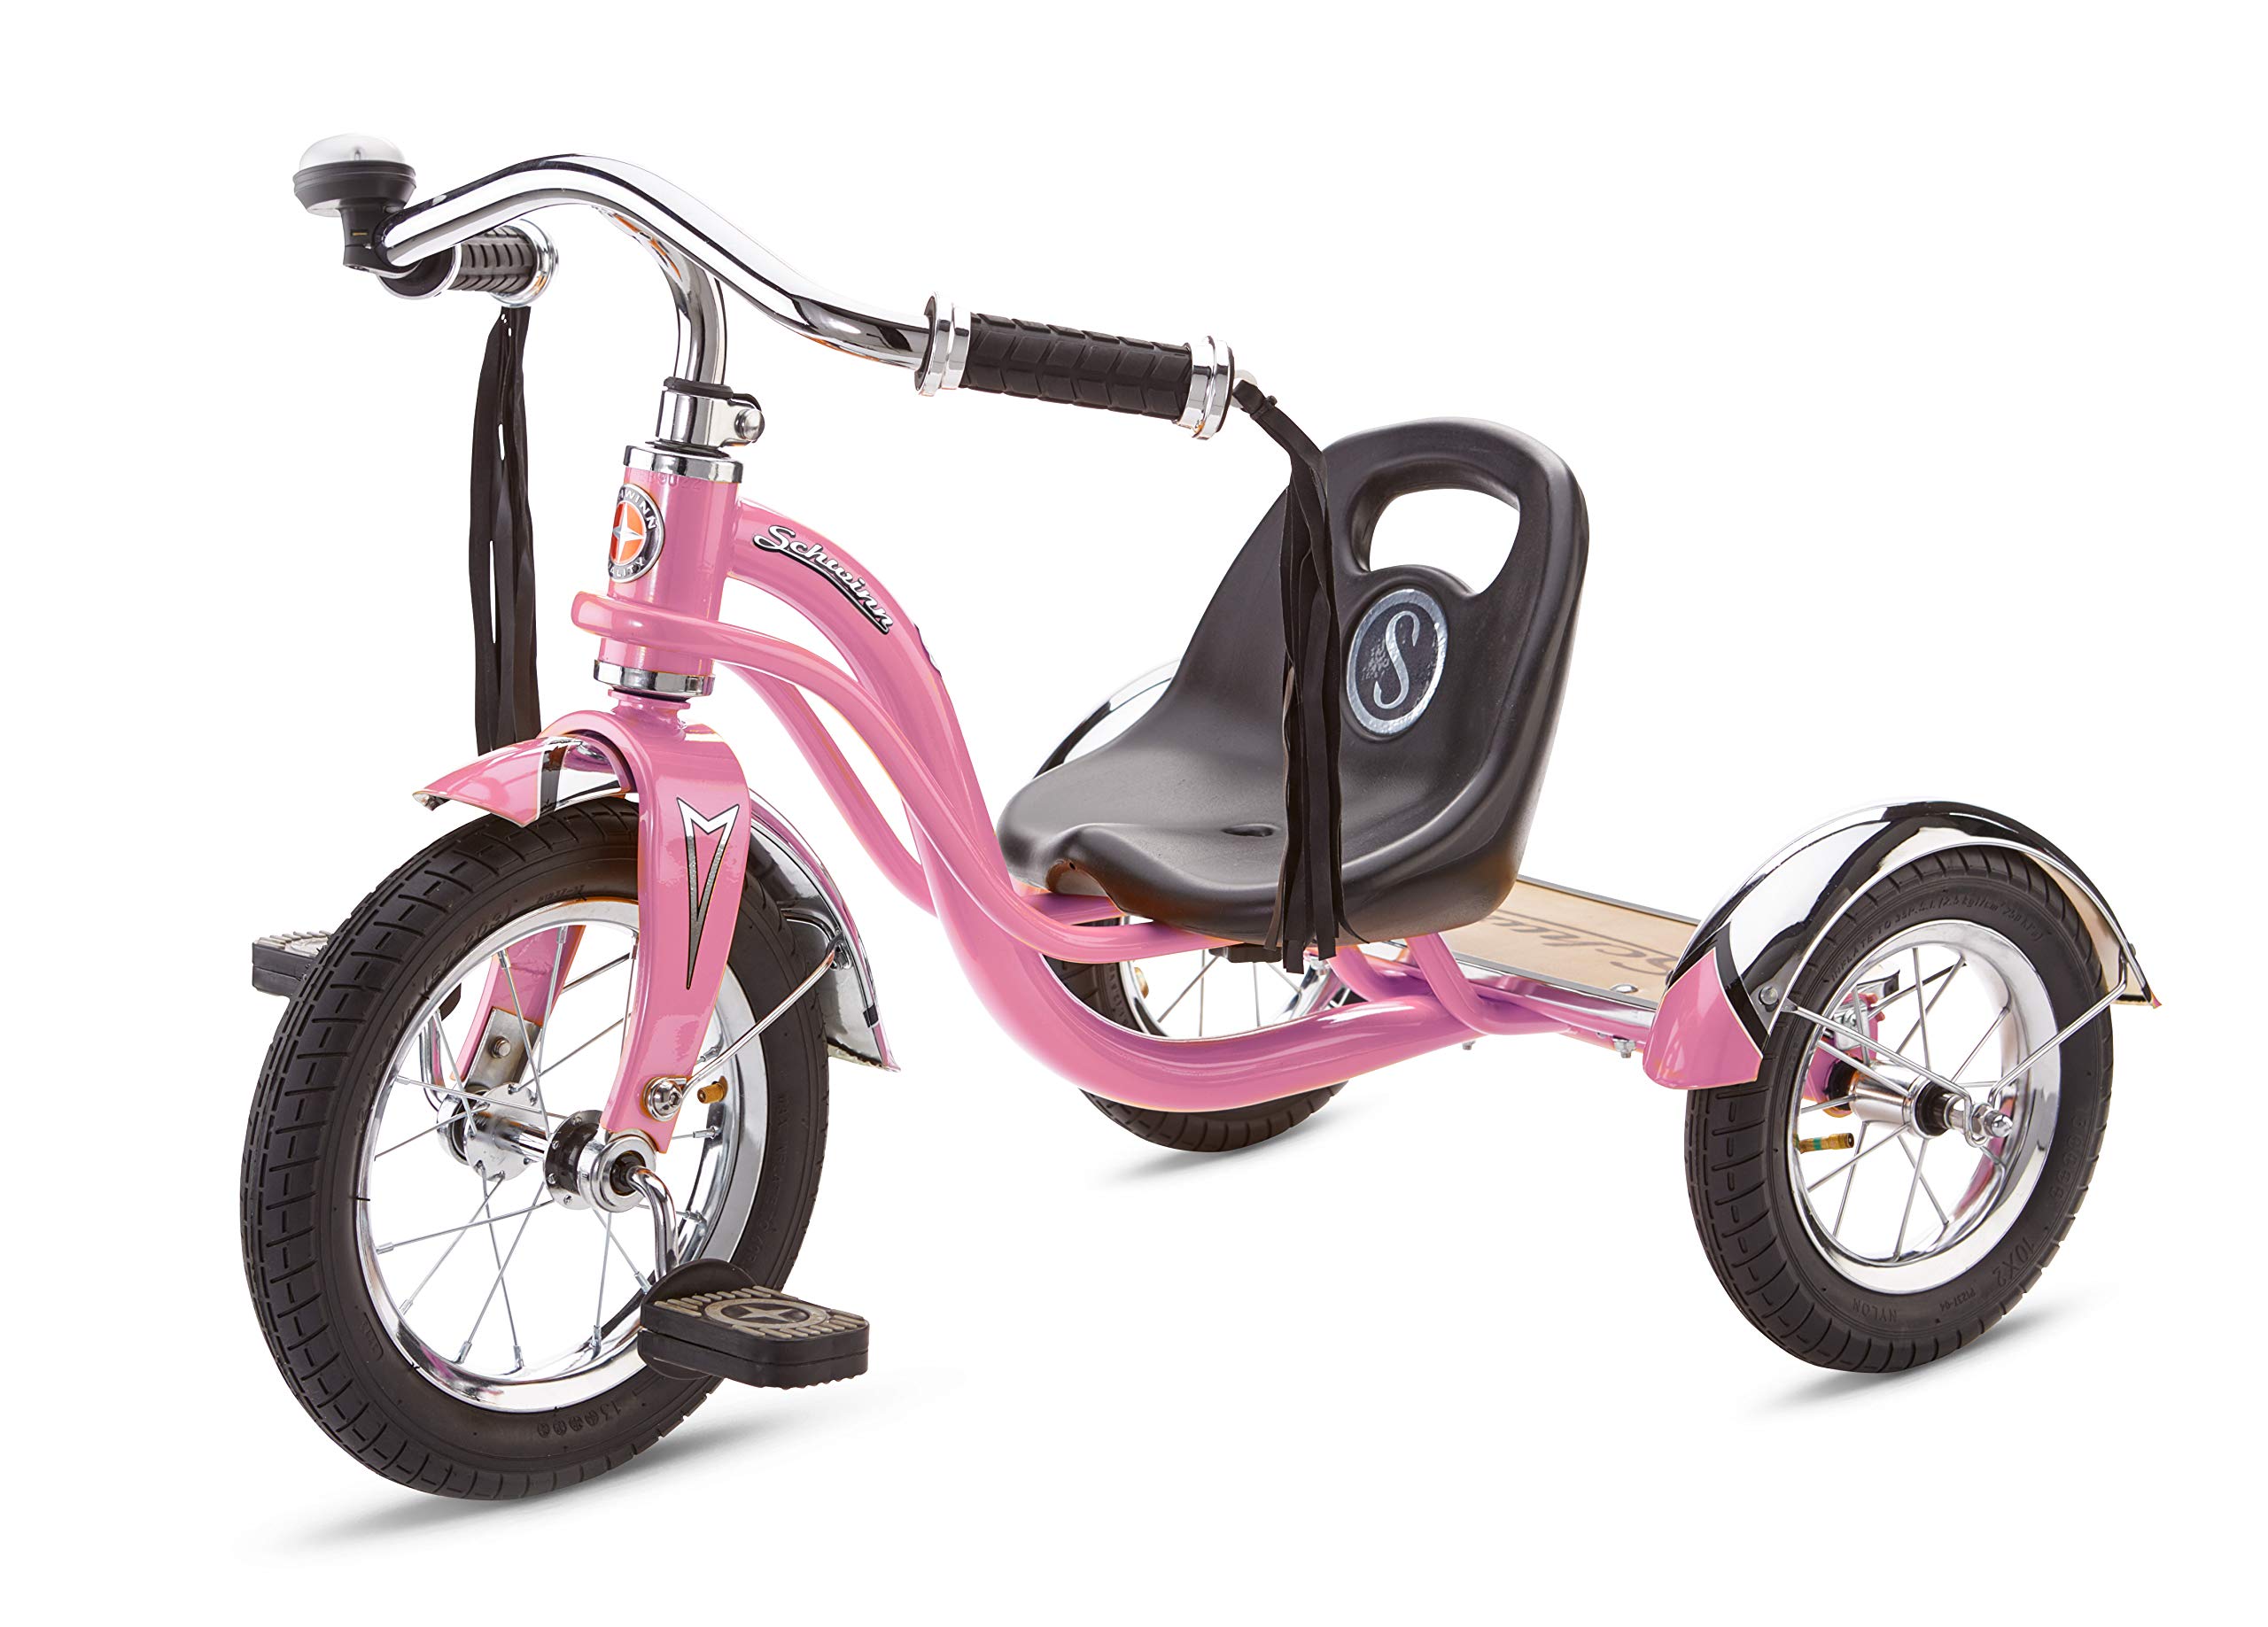 Schwinn Roadster Bike for Toddler, Kids Classic Tricycle, Low Positioned Steel Trike Frame w/ Bell & Handlebar Tassels, Rear Deck Made of Genuine Wood, for Boys and Girls Ages 2-4 Year Old, Light Pink